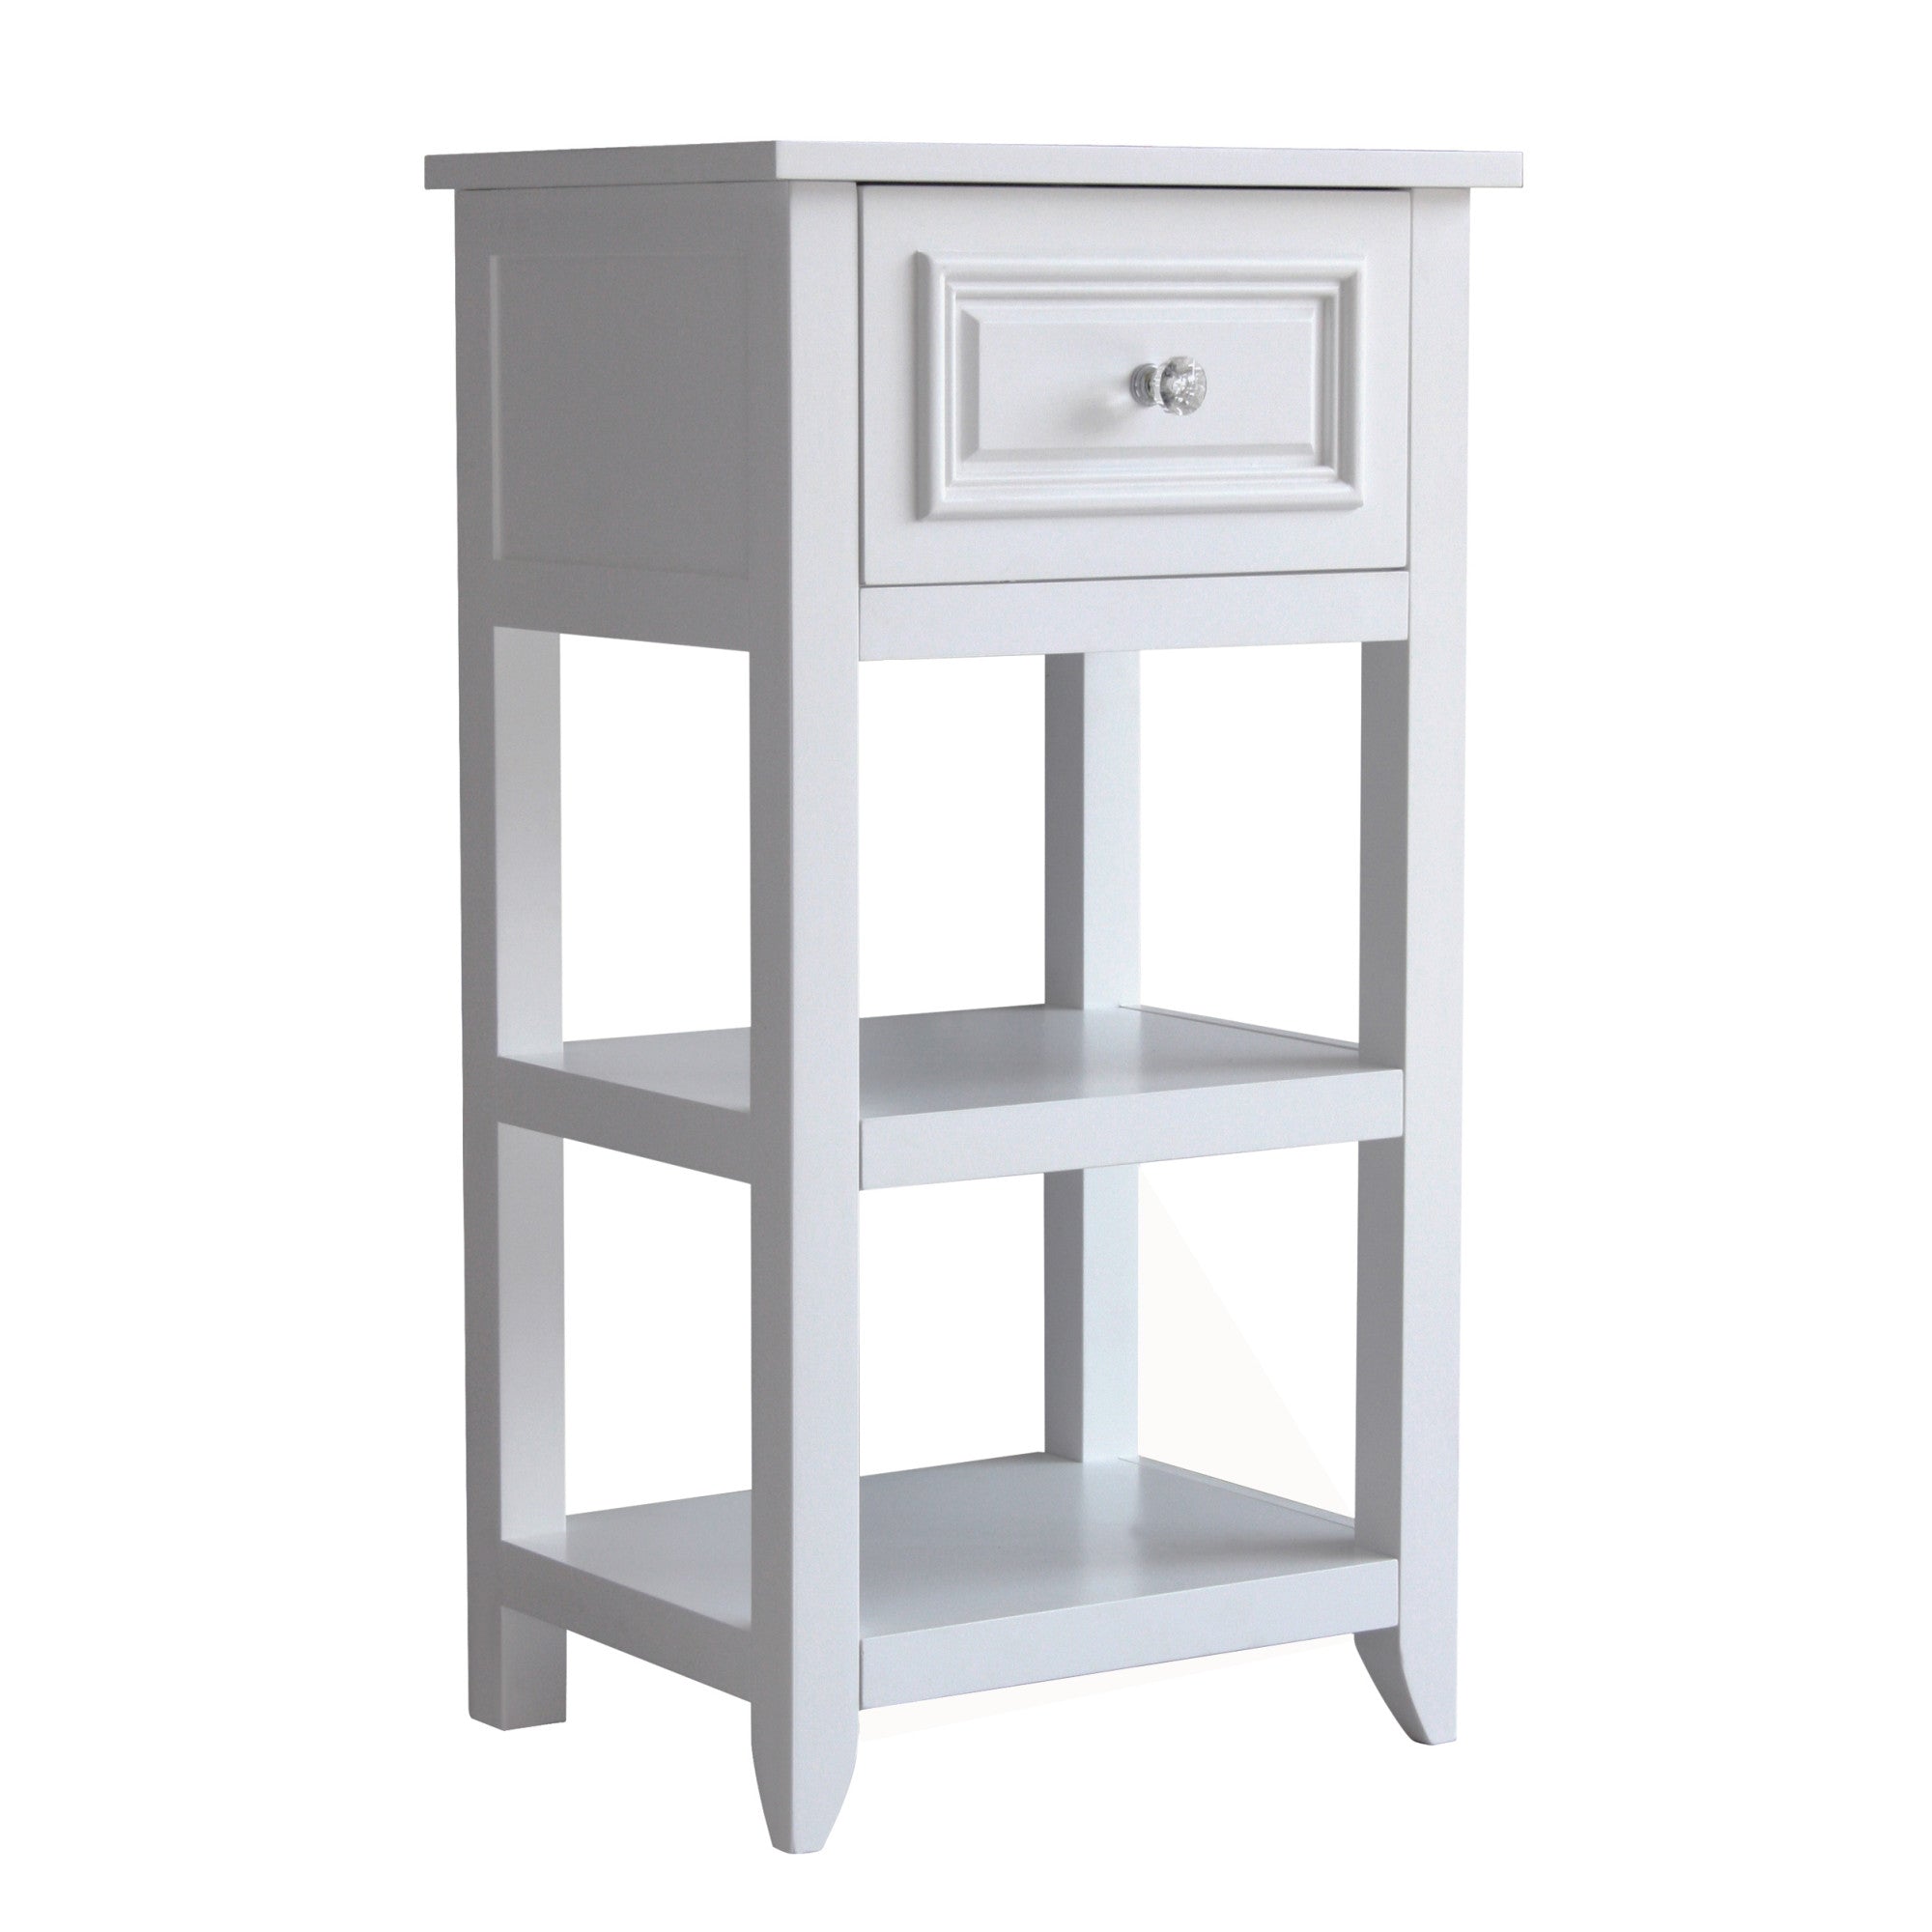 Dawson Floor Cabinet With One Drawer and Shelves